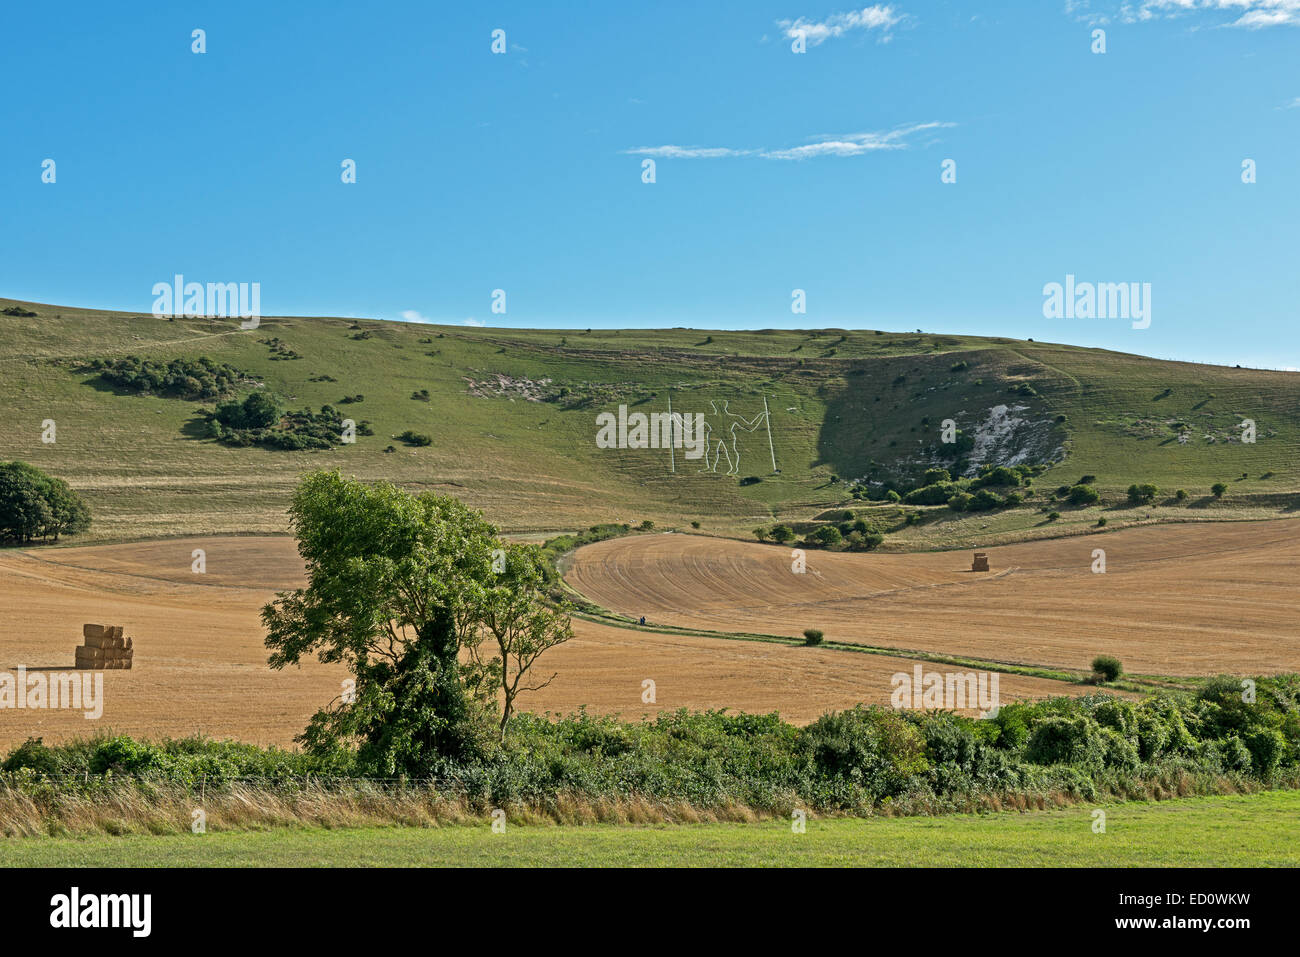 Landscape View Of The Long Man Of Wilmington, Wilmington,East Sussex, England, Uk Stock Photo